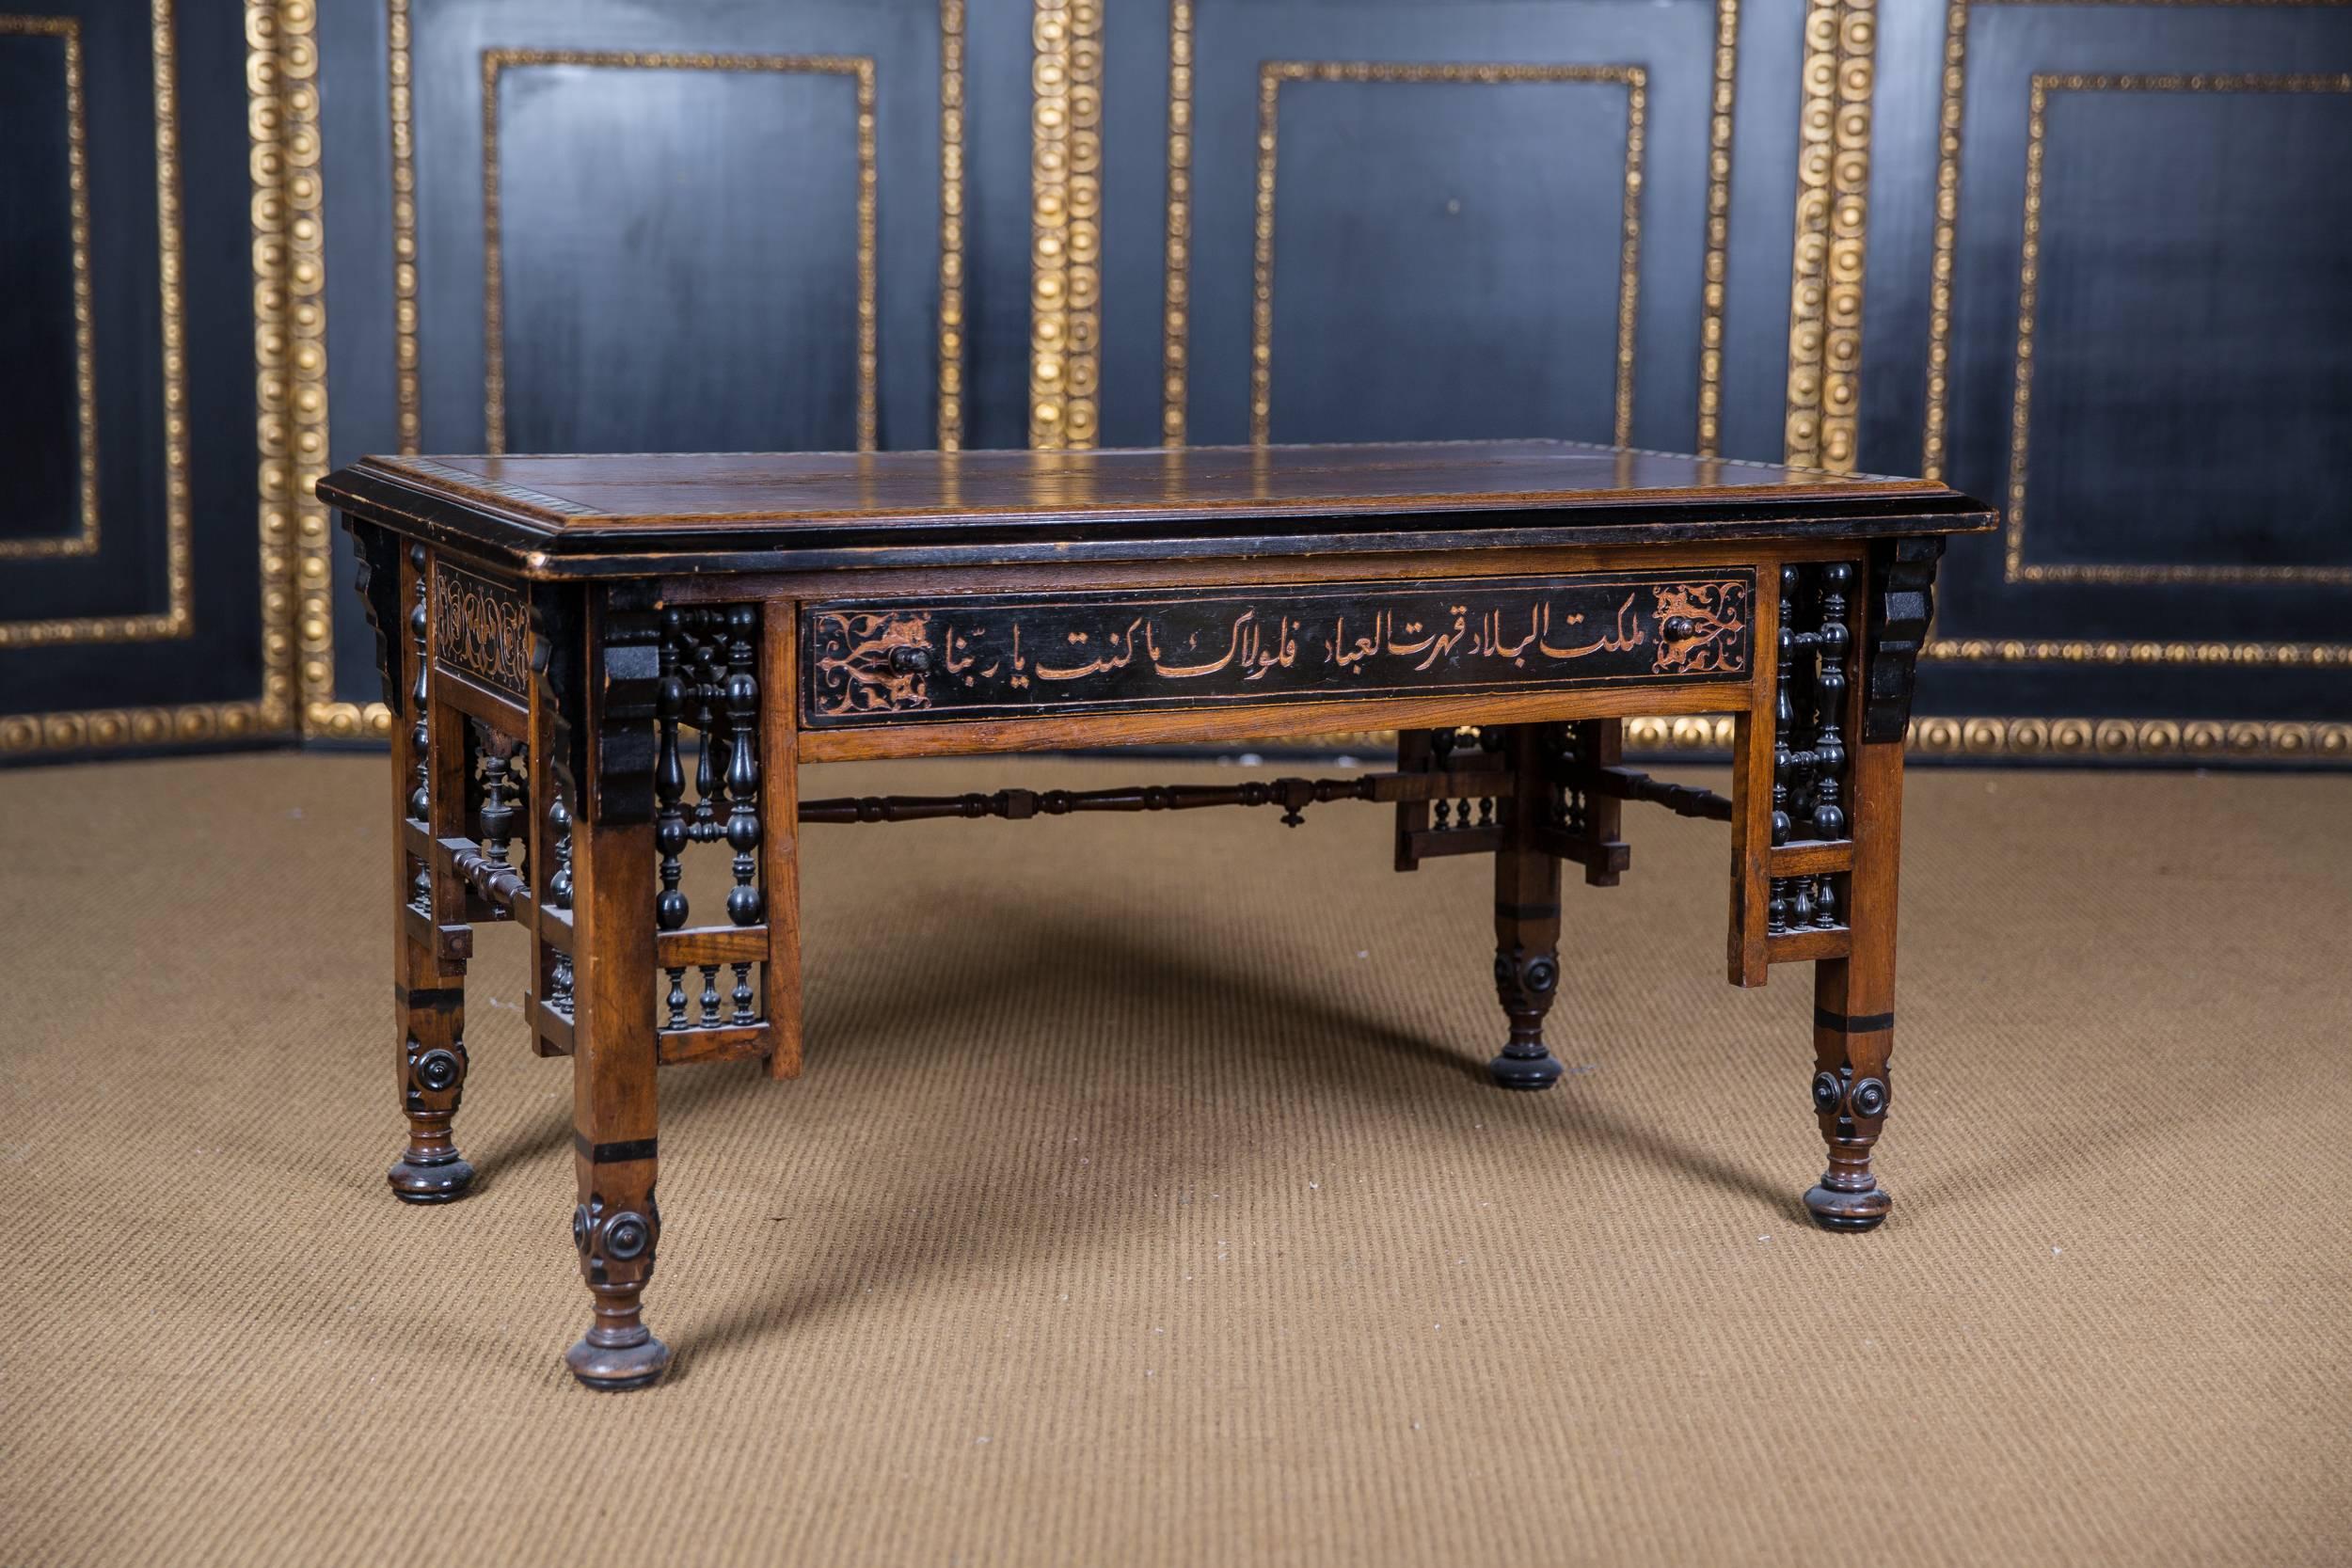 Solid wood with various inlays. Beautifully turned.

This type of furniture was very popular in Europe in the 19th century.